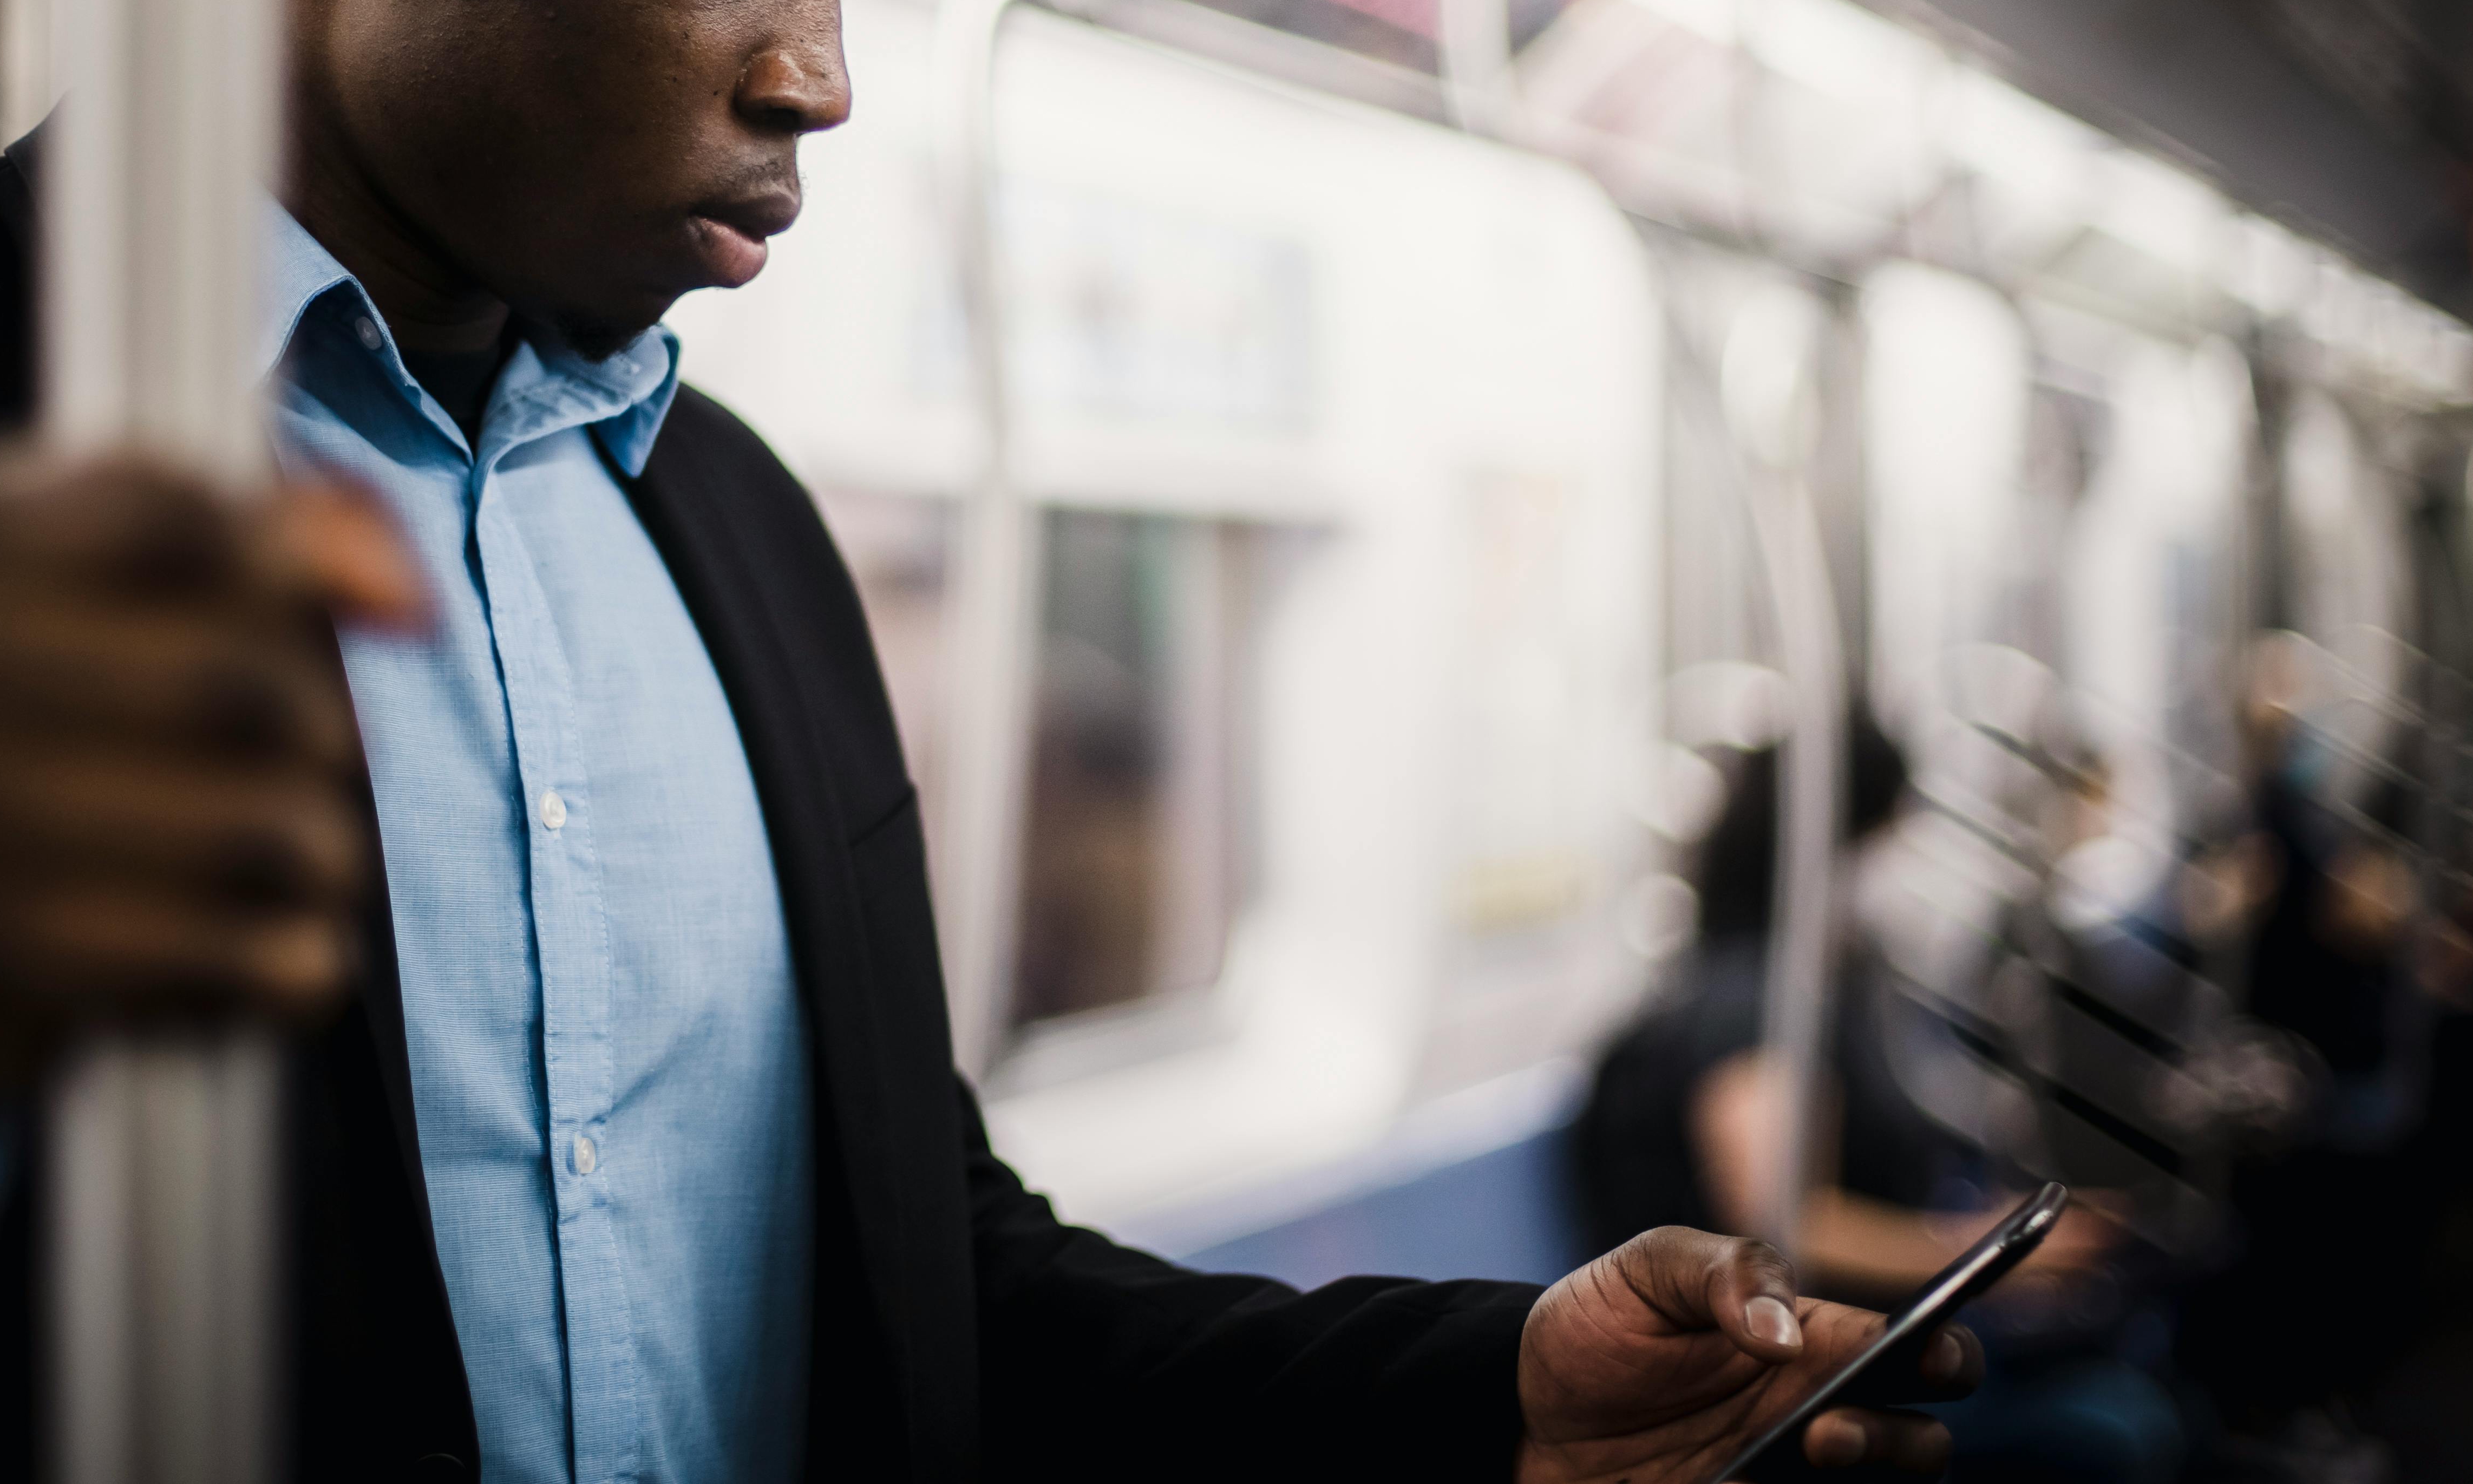 A man works his cell phone on a subway carriage | Source: Pexels